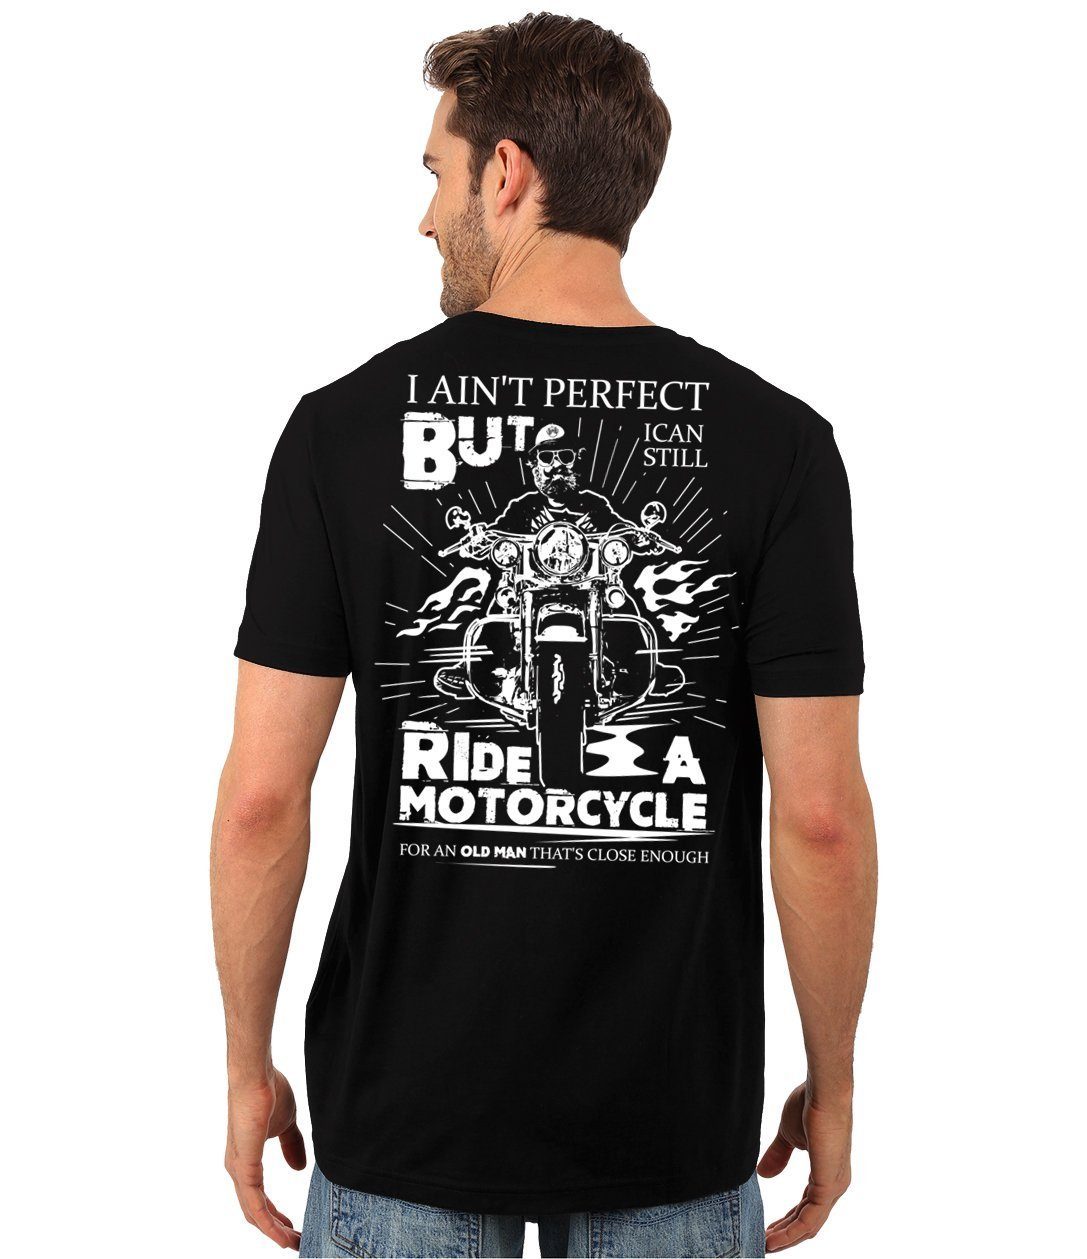 I Can Still Ride a Motorcycle T-Shirt